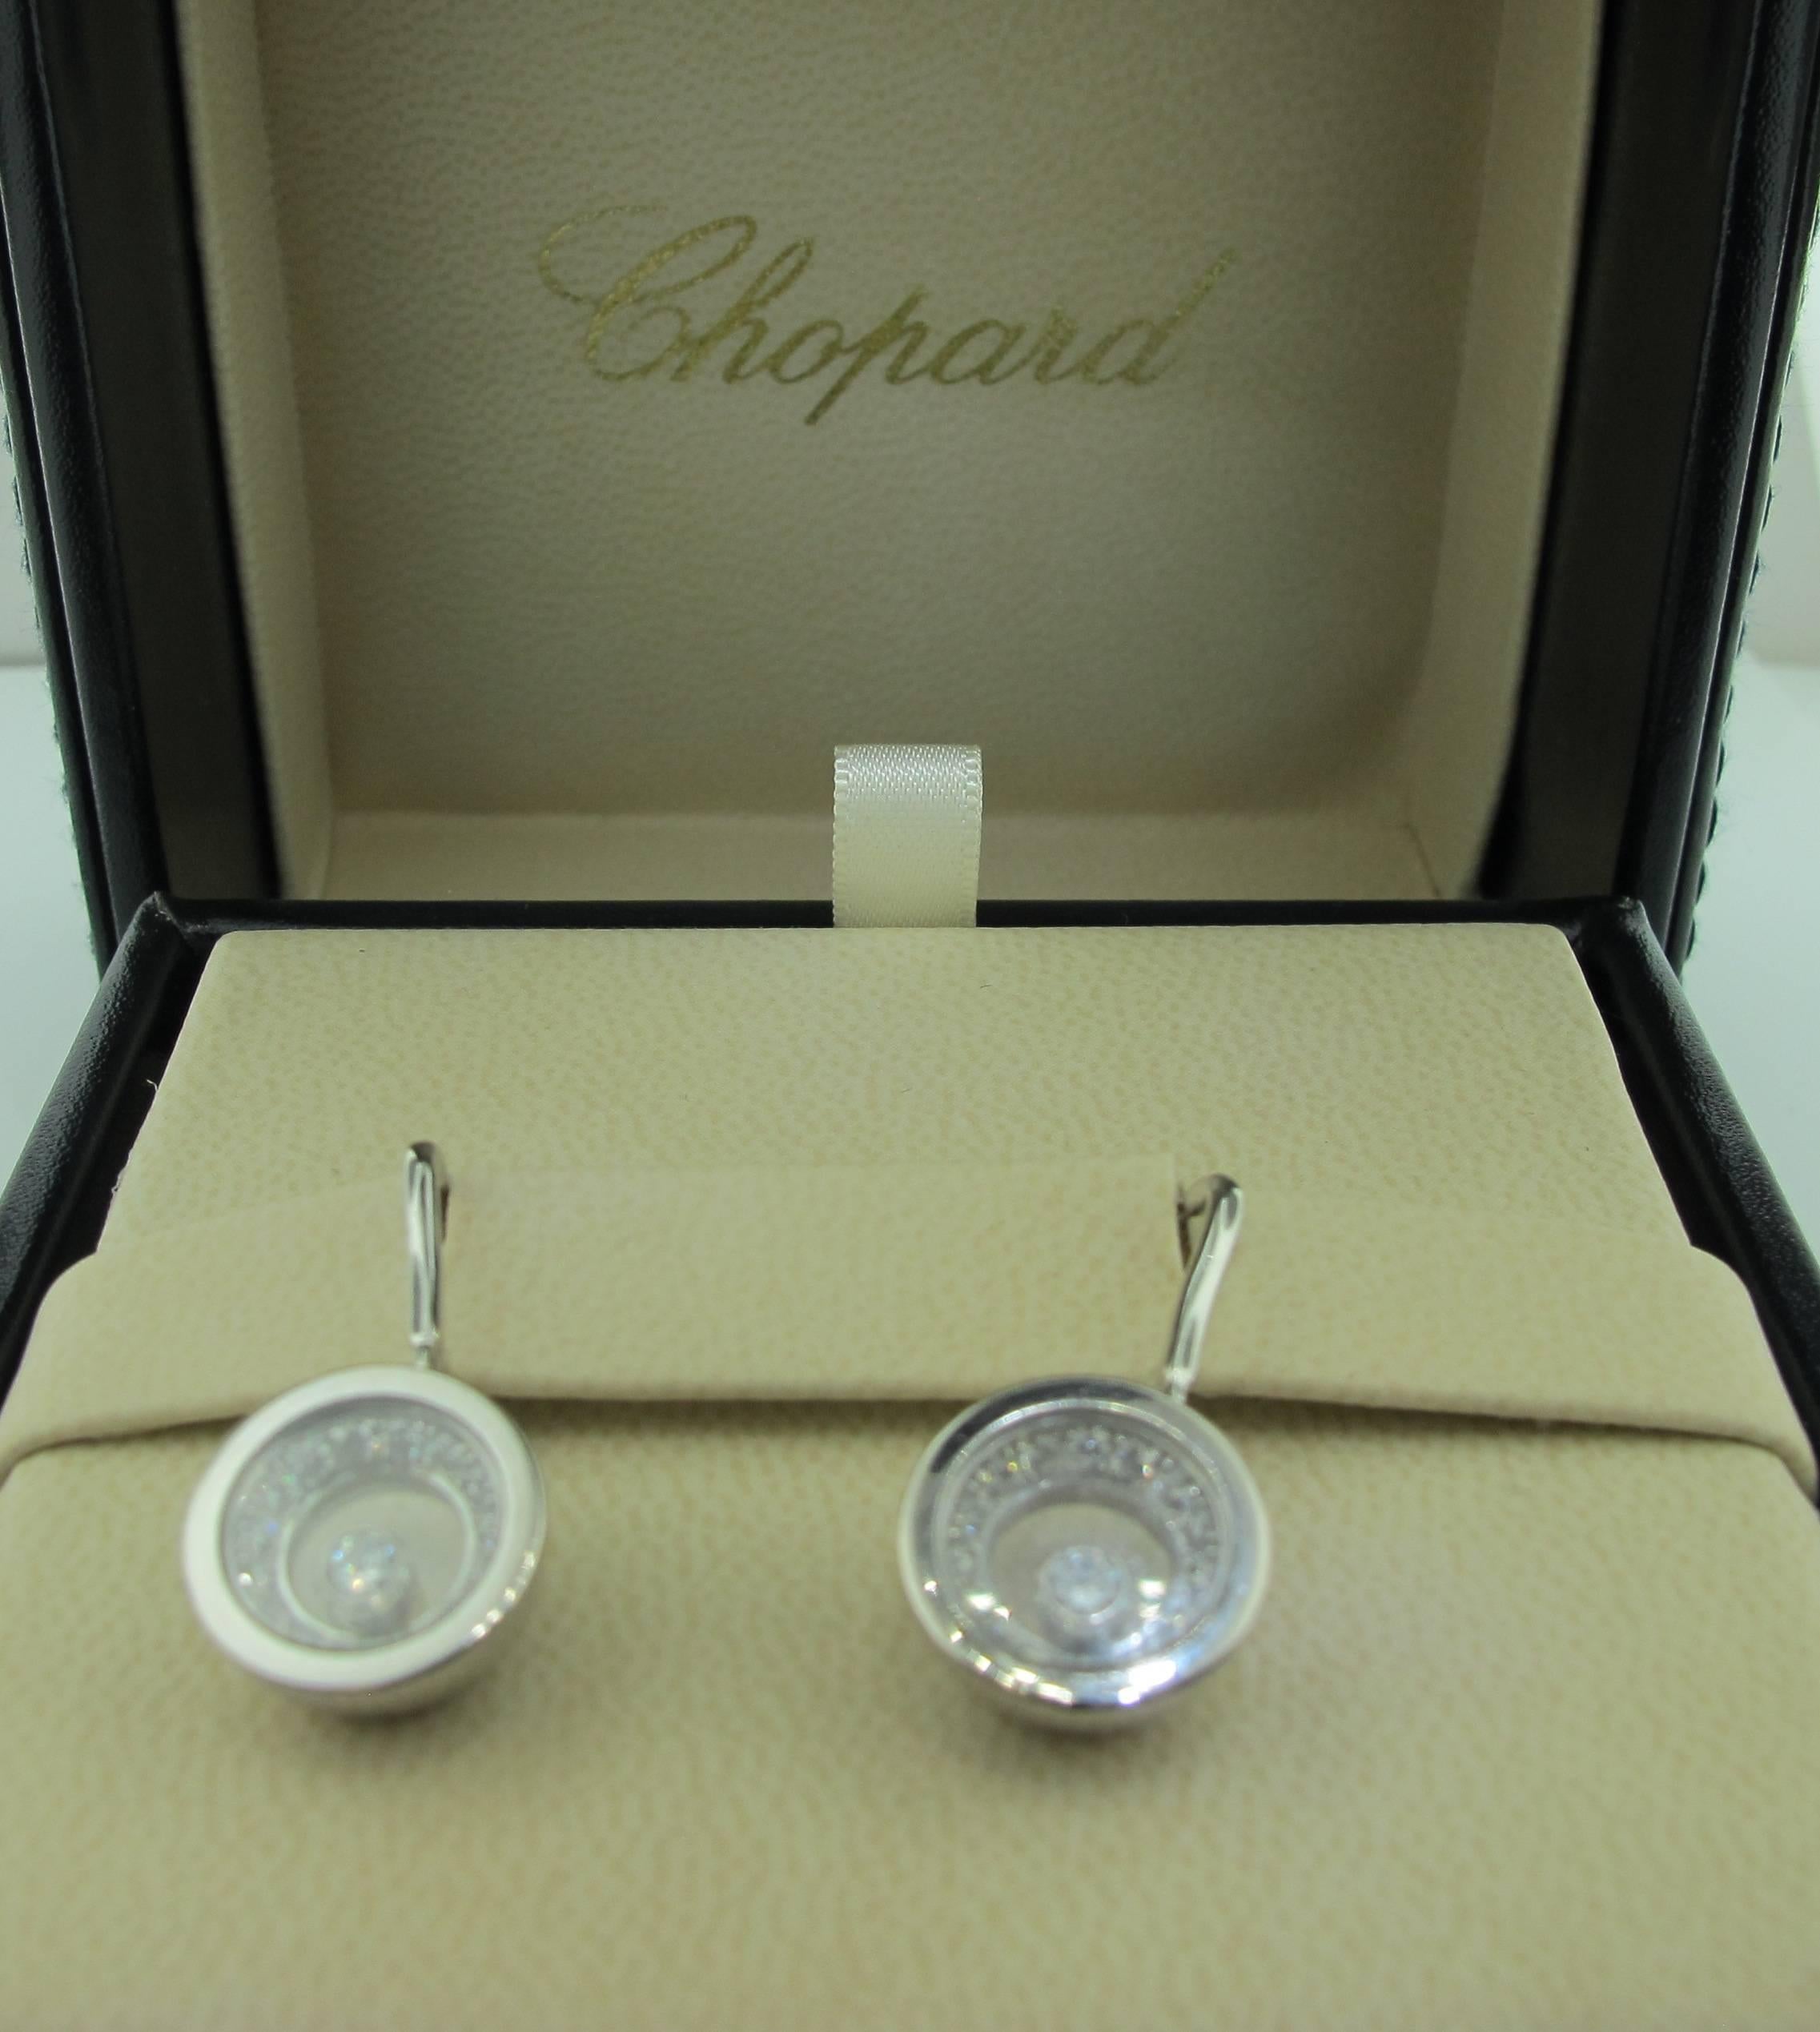 These Chopard Happy Diamond Earrings are signed and numbered.  They are set in 18 karat white gold weighing 11.8 grams.  There are 30 diamonds weighing 0.44 carats, plus the two "happy" diamonds that total 0.20 carats.  Color and clarity: